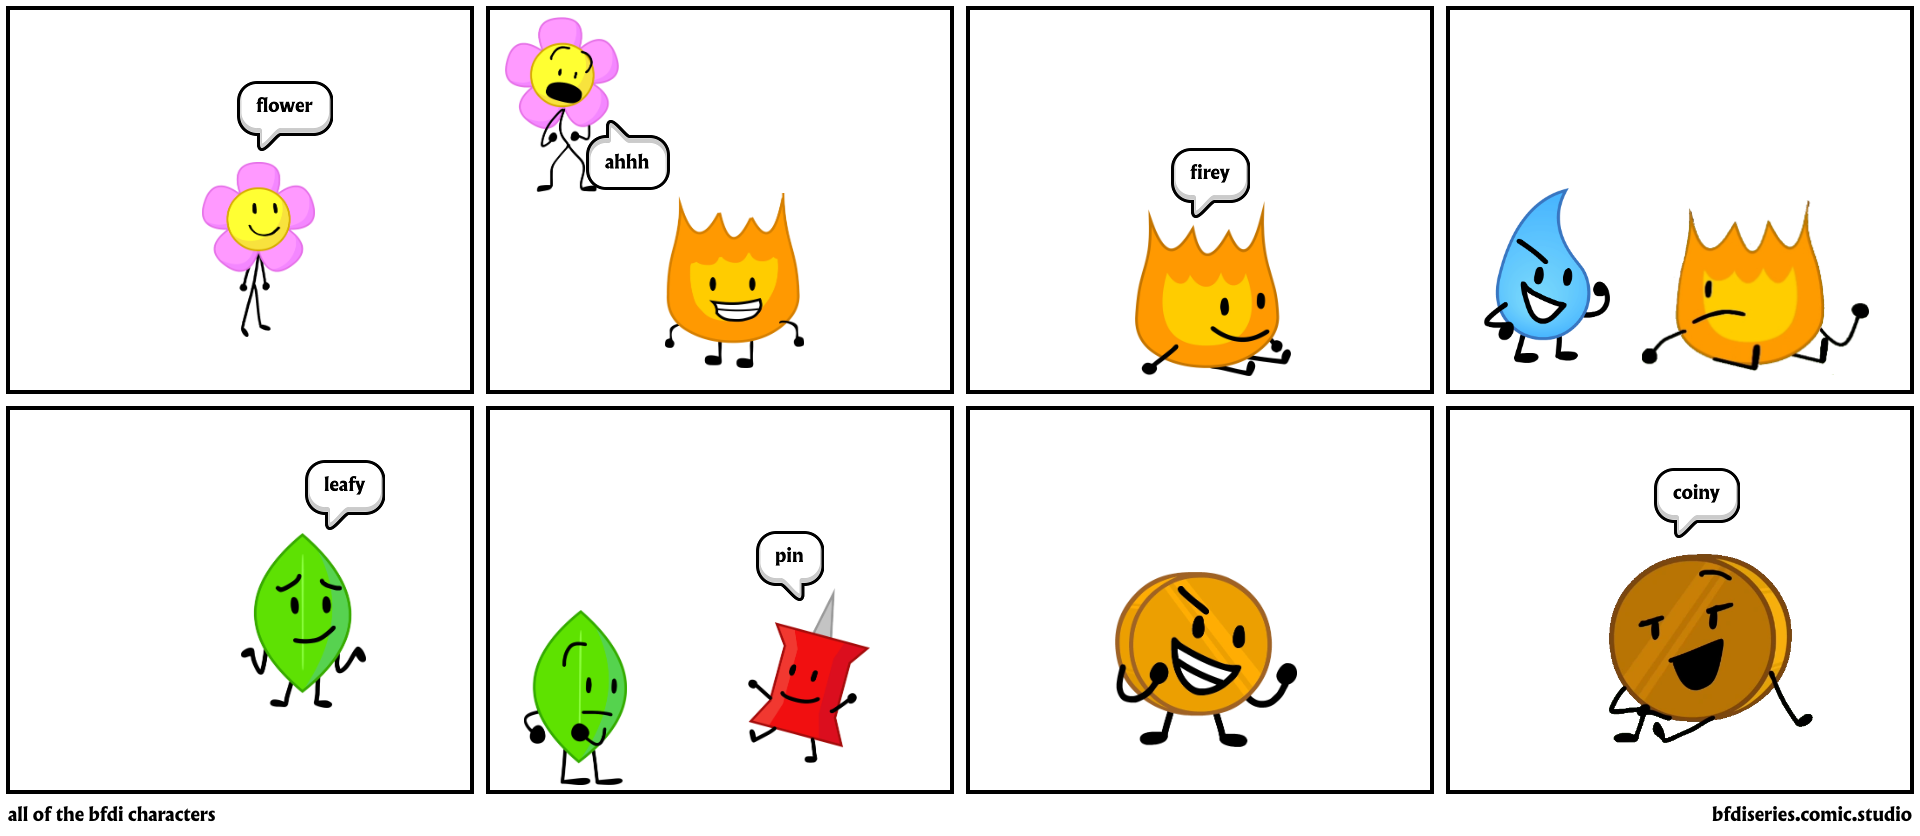 all of the bfdi characters